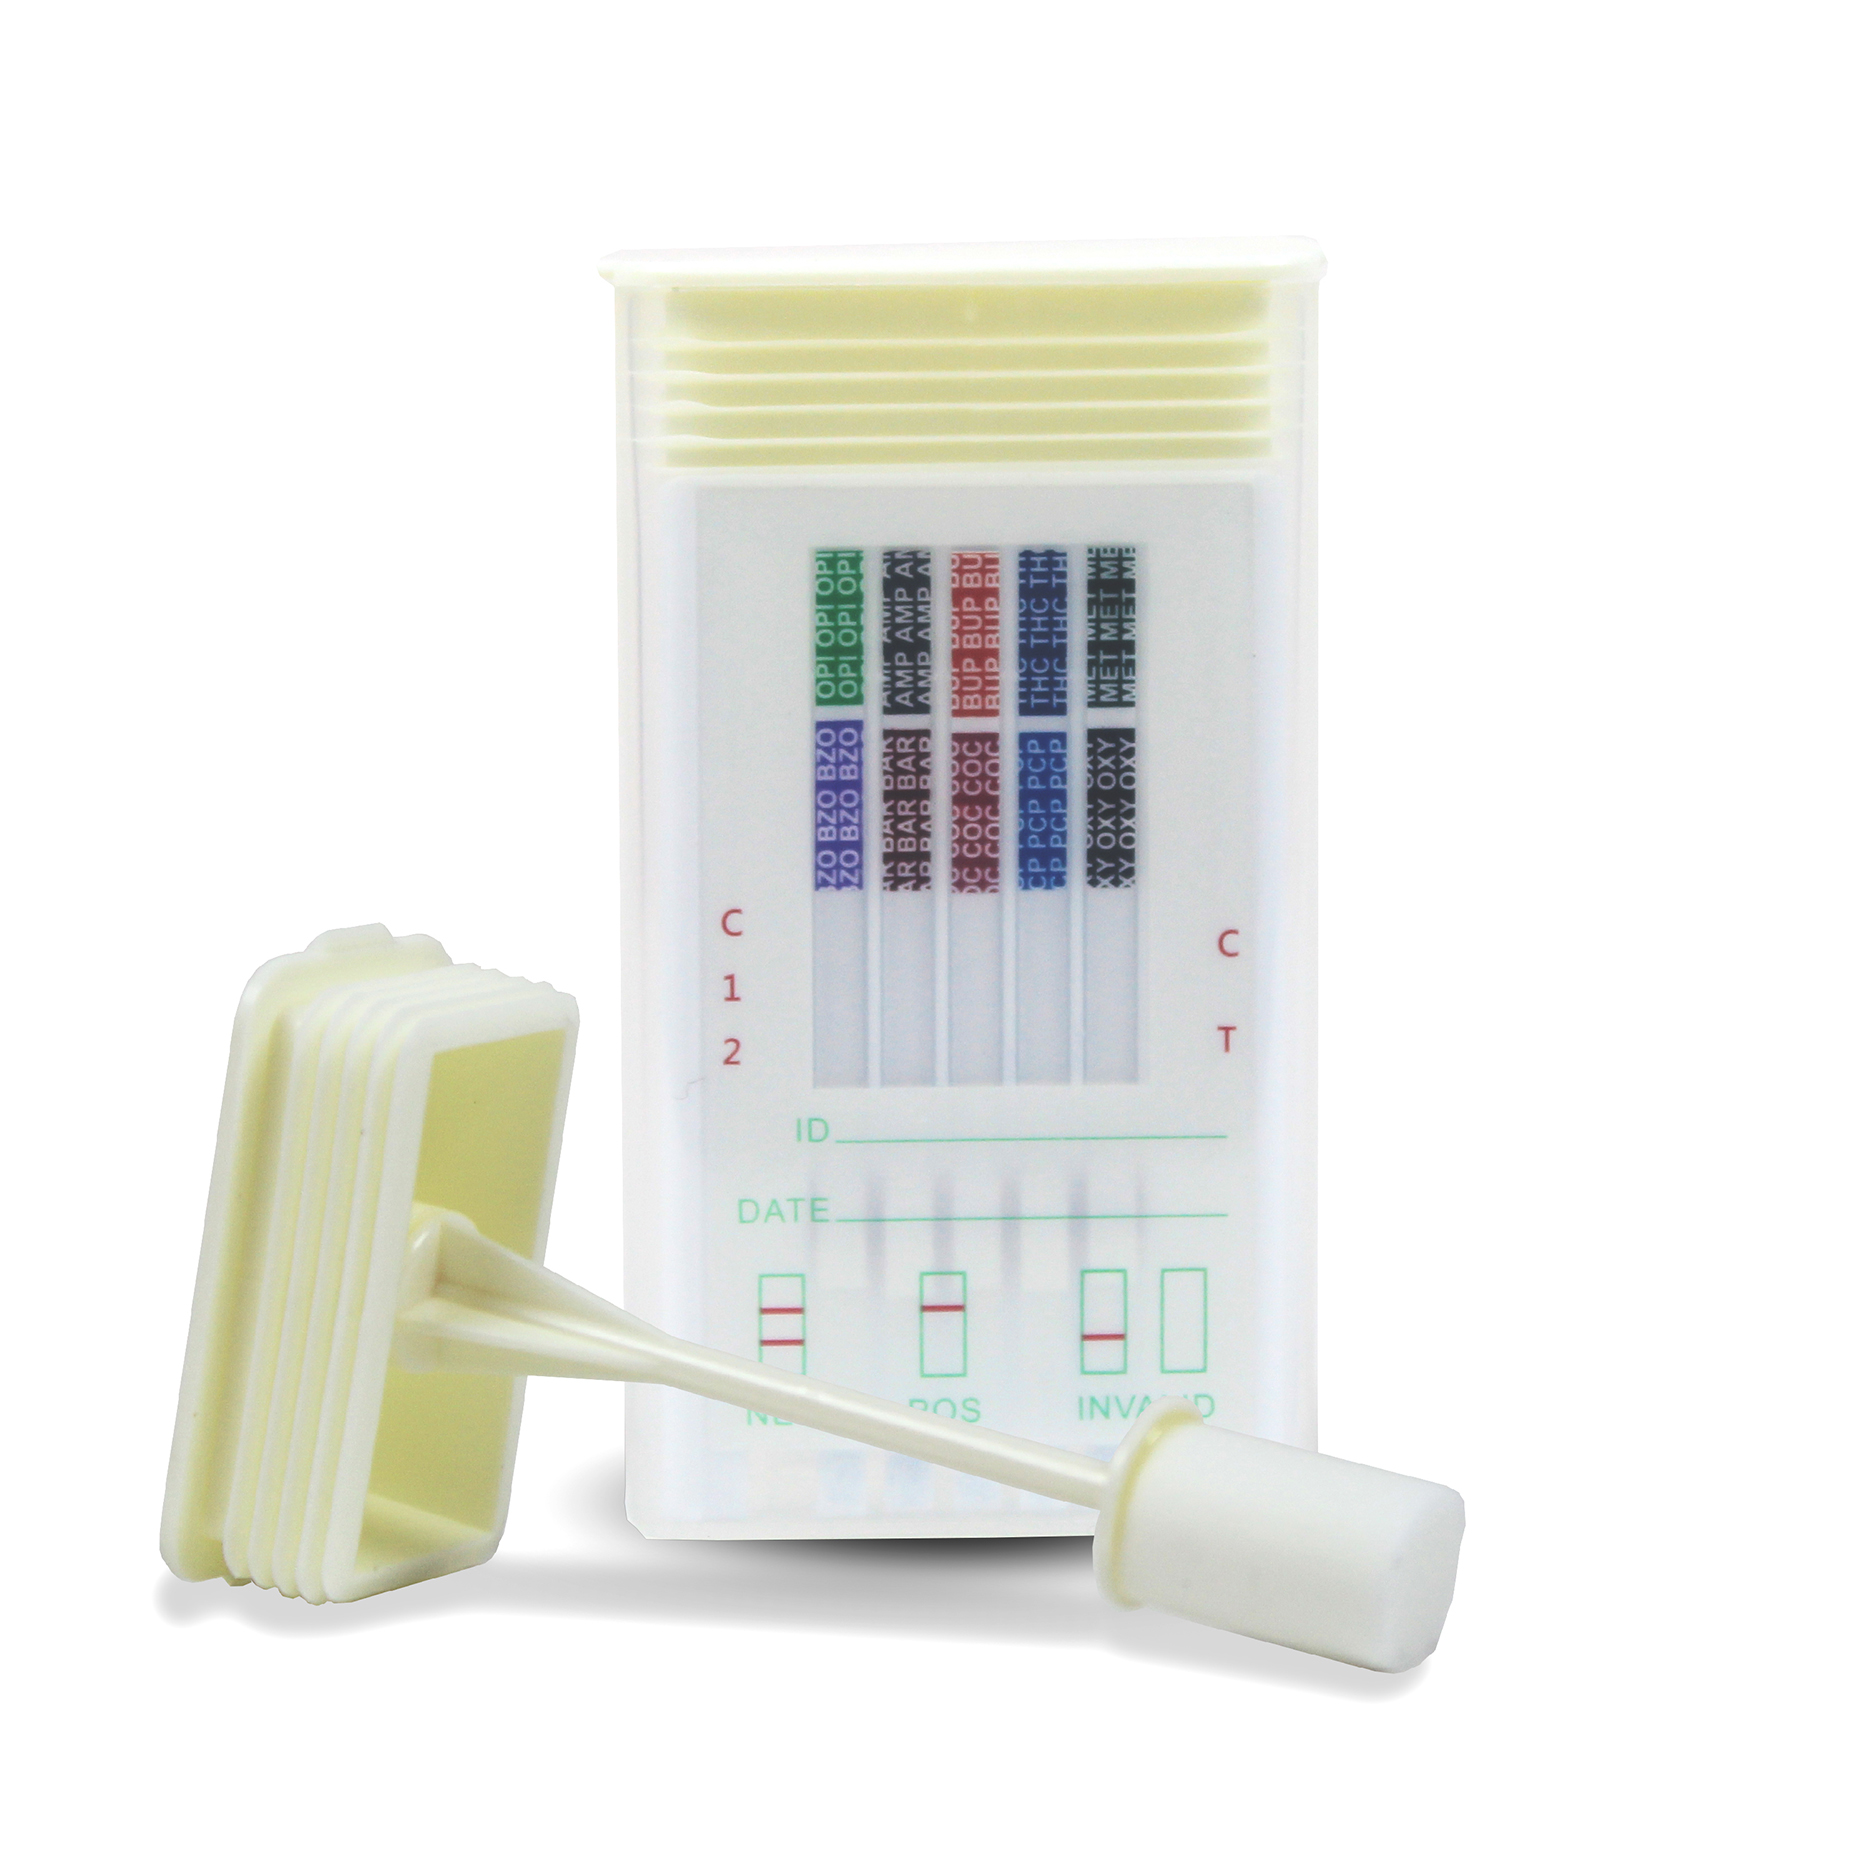 Discover One-Step - 10 Panel Saliva <span style='font-size:11px; color:#7d7d7d;'><br>AMP, BZO, COC, KET, MET, MTD, OPI, PPX, THC, ALCO</span>